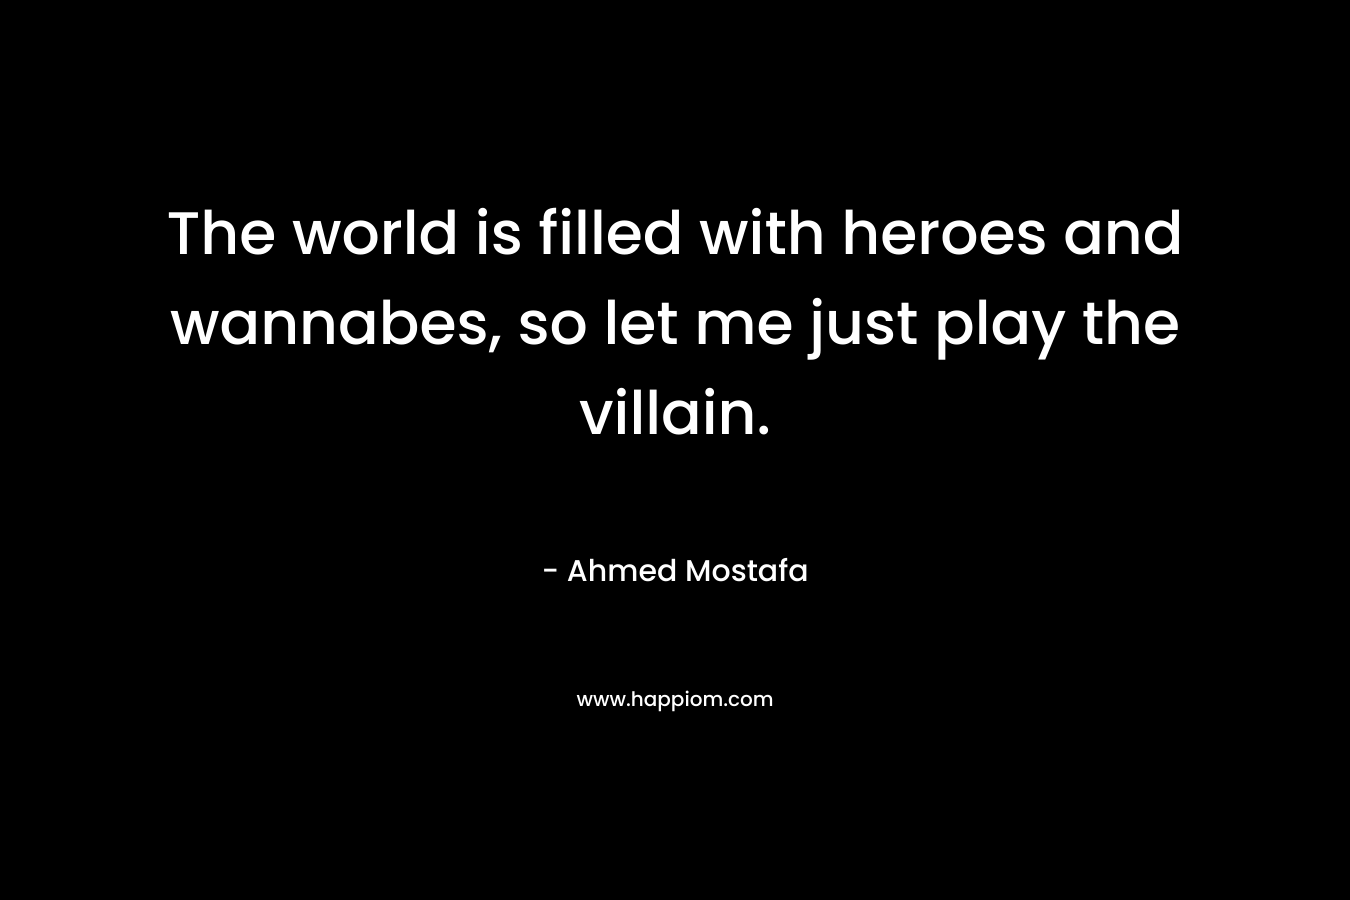 The world is filled with heroes and wannabes, so let me just play the villain. – Ahmed Mostafa